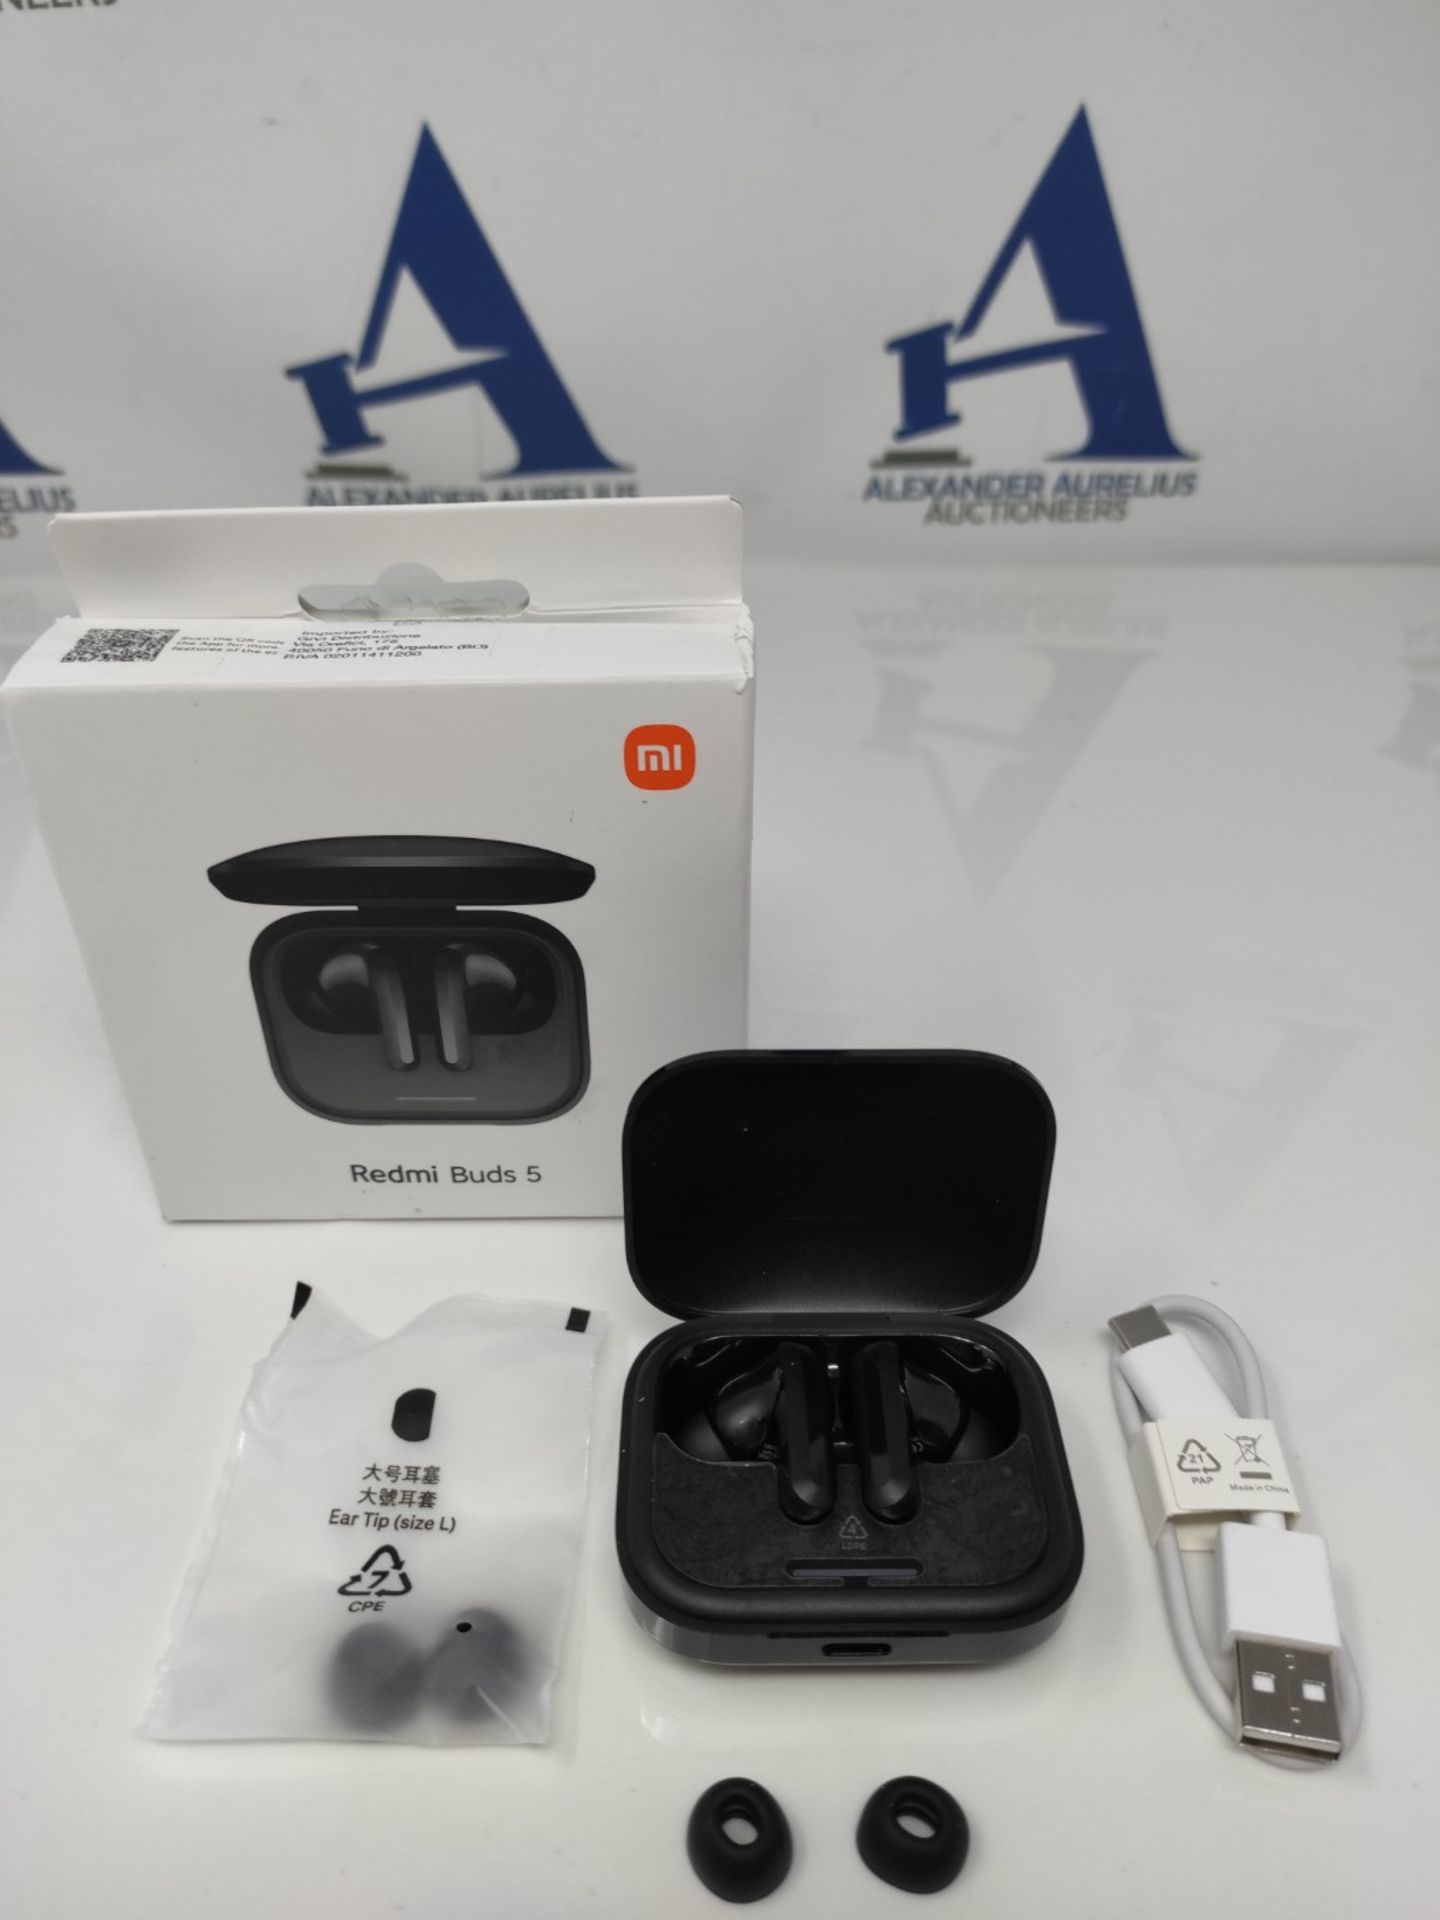 Xiaomi Redmi Buds 5, Bluetooth Earphones, 12.4mm Dynamic Driver, Active Noise Cancella - Image 2 of 2